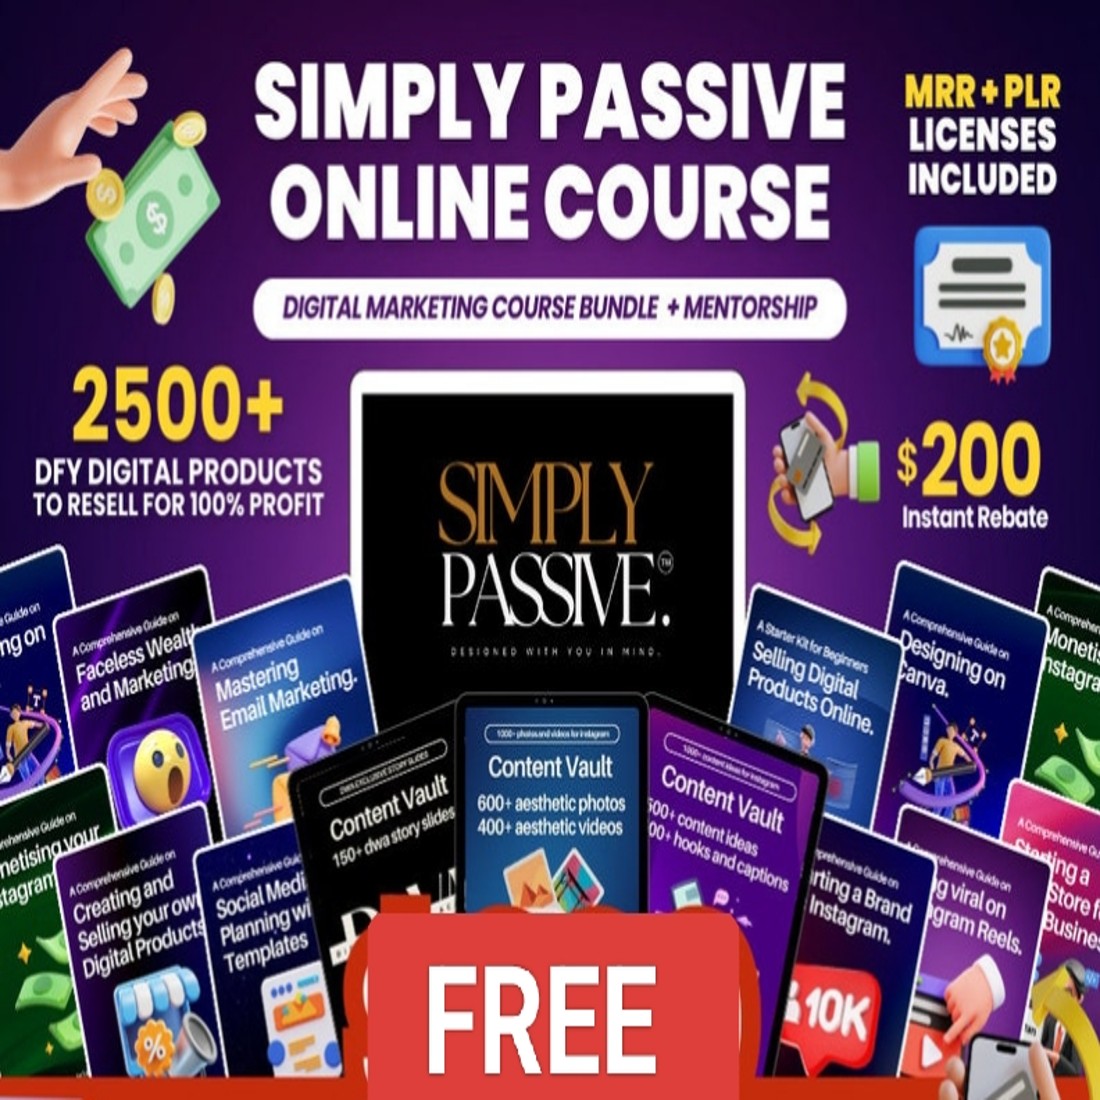 Digital Marketing Course Simply Passive with Master Resell Rights Guides MRR & PLR cover image.